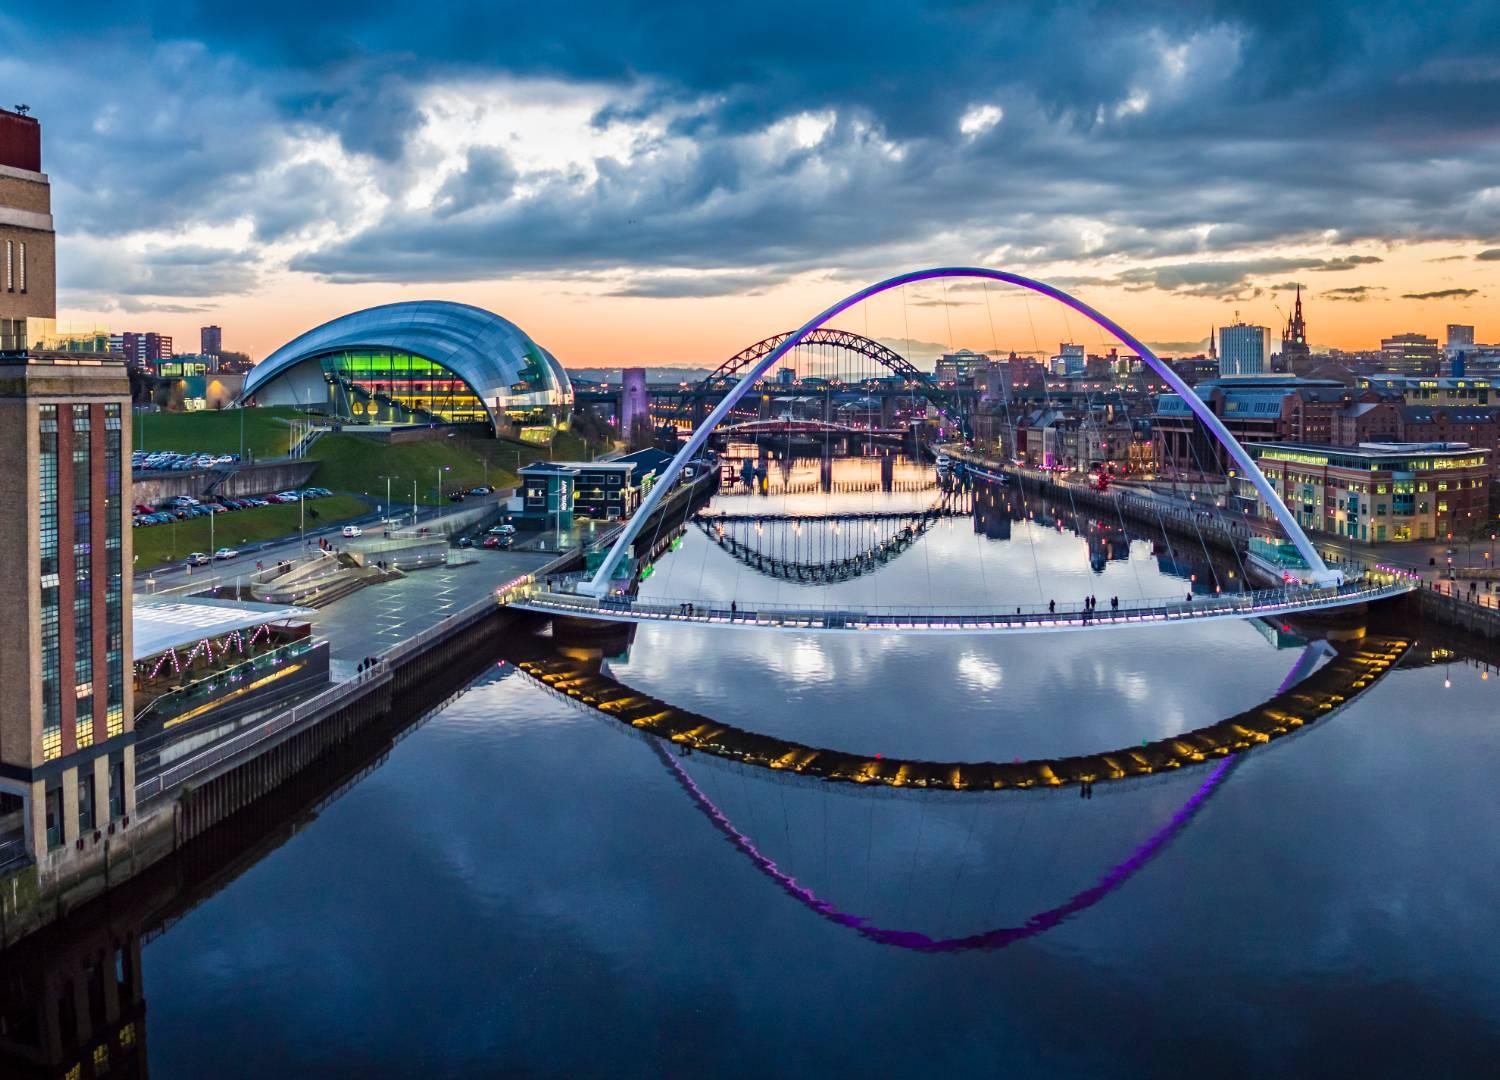 A photograph of the River Tyne and its bridges